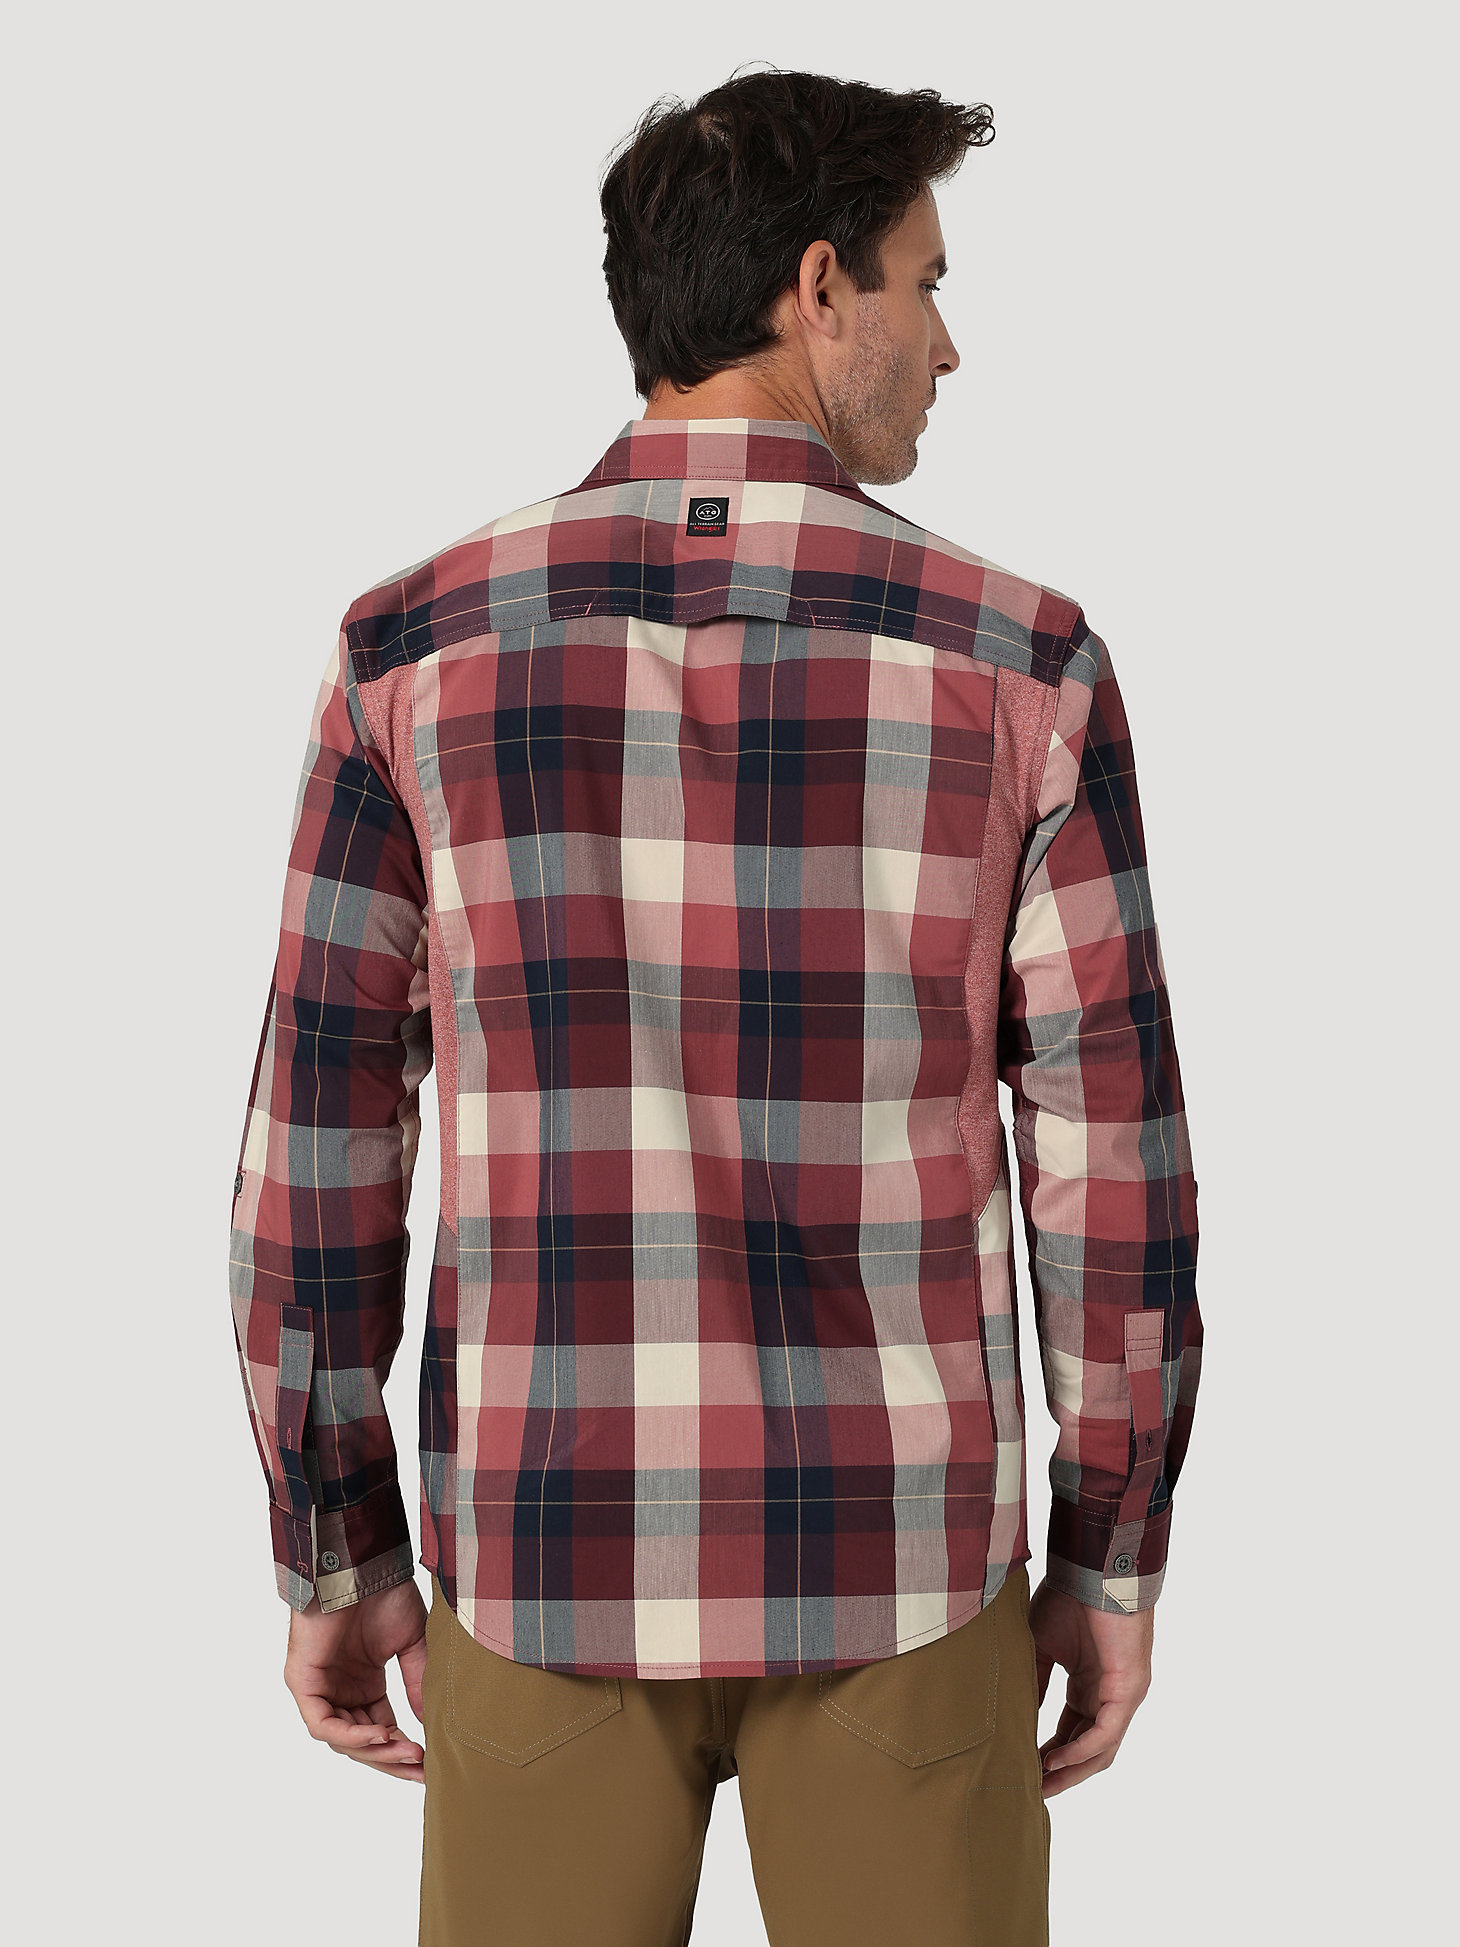 ATG By Wrangler™ Plaid Mixed Material Shirt in Beagle Apple Butter alternative view 3